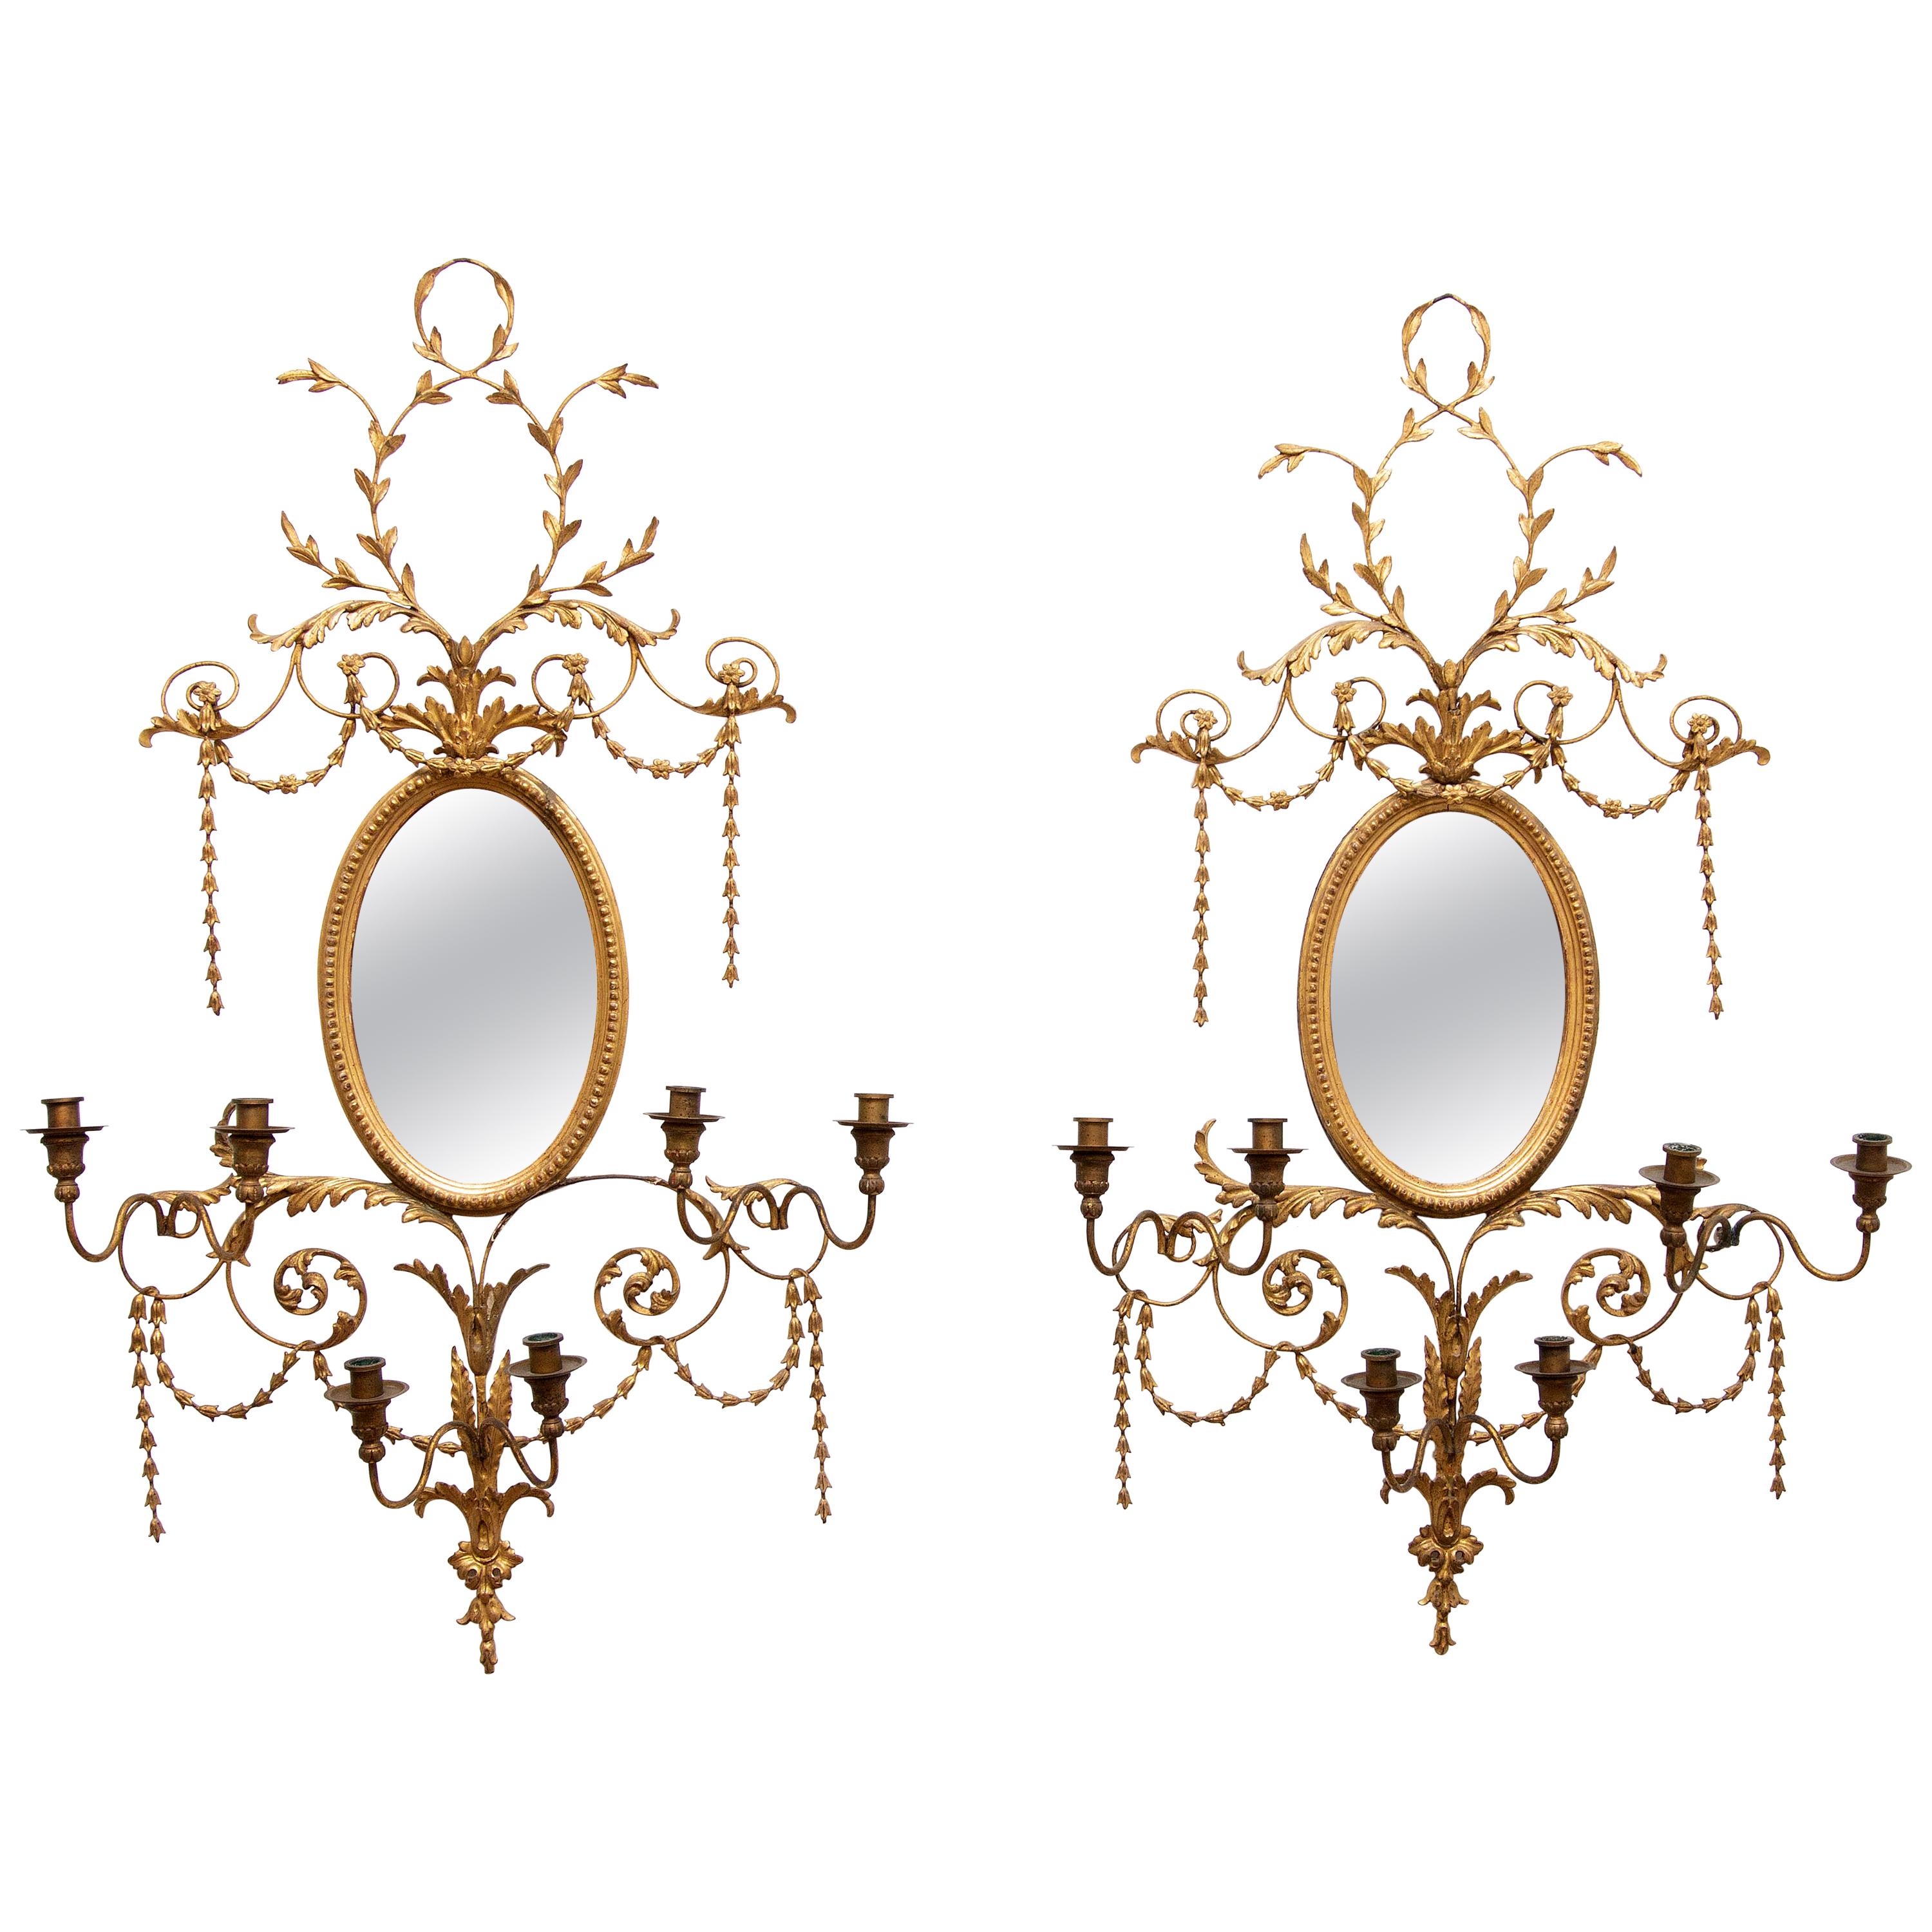 Pair of Adams Style Gilt Mirrors with Sconces